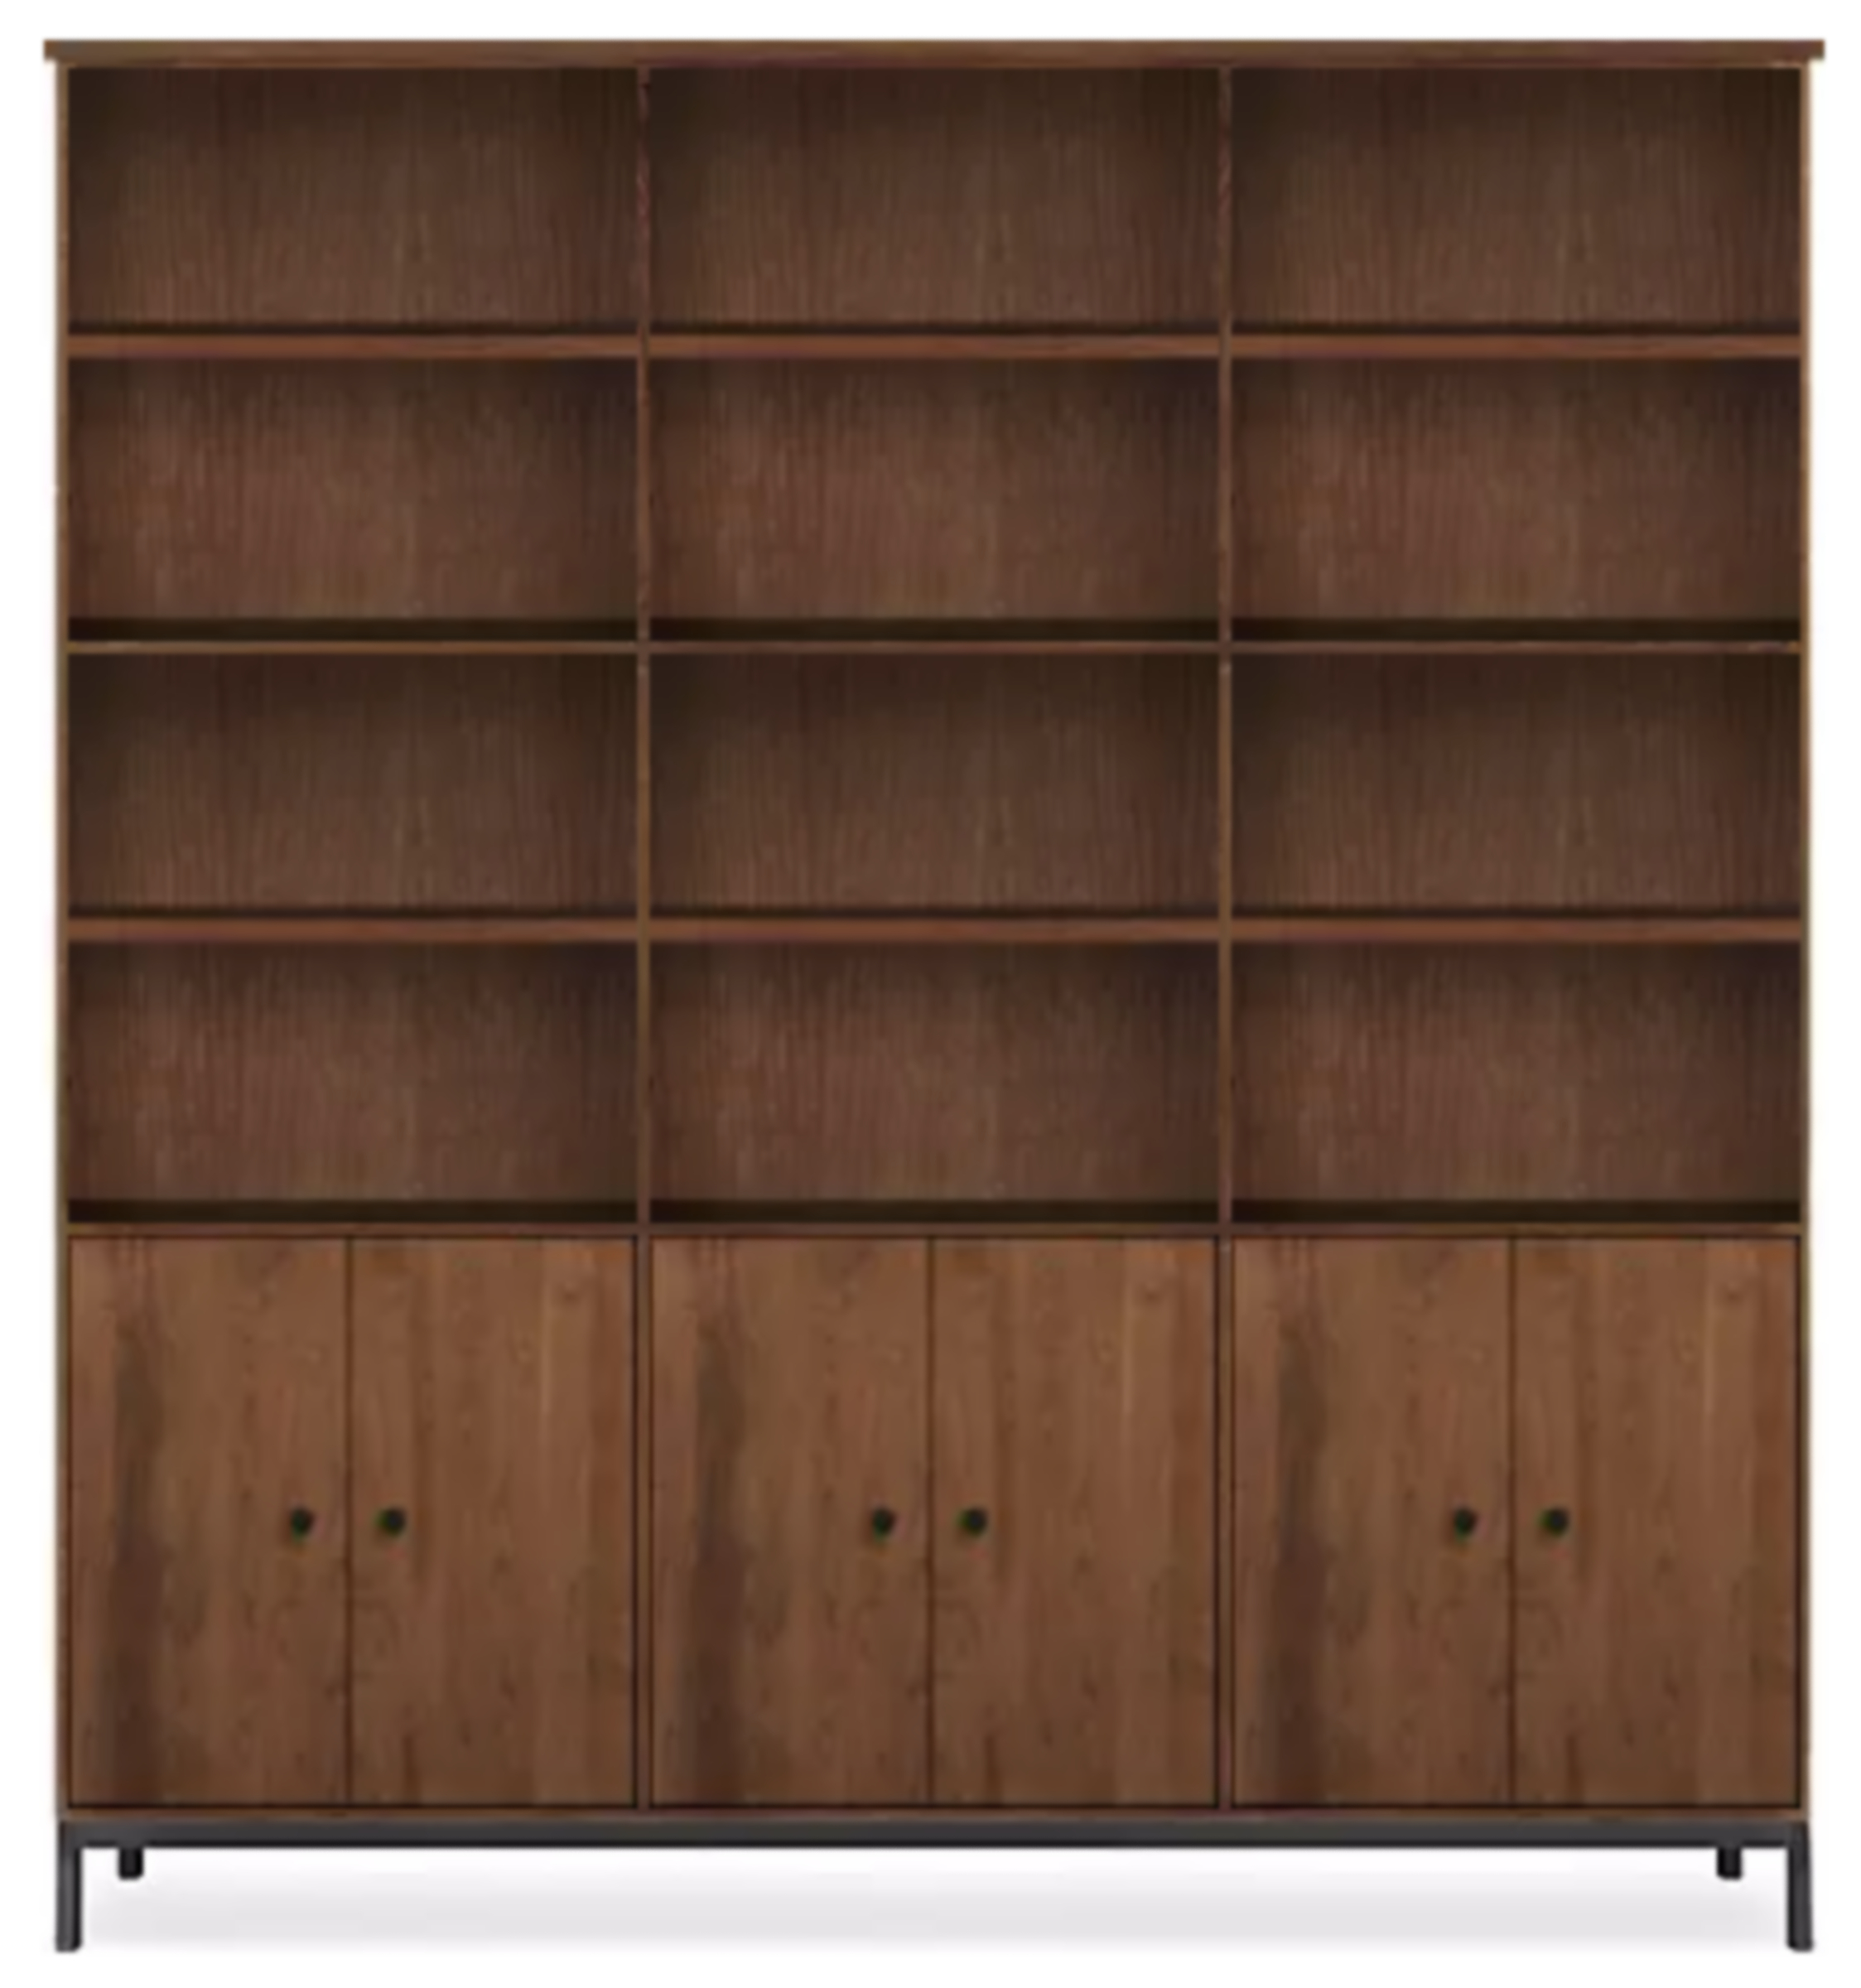 Linear 74w 16d 80h Cabinet in Walnut with Natural Steel